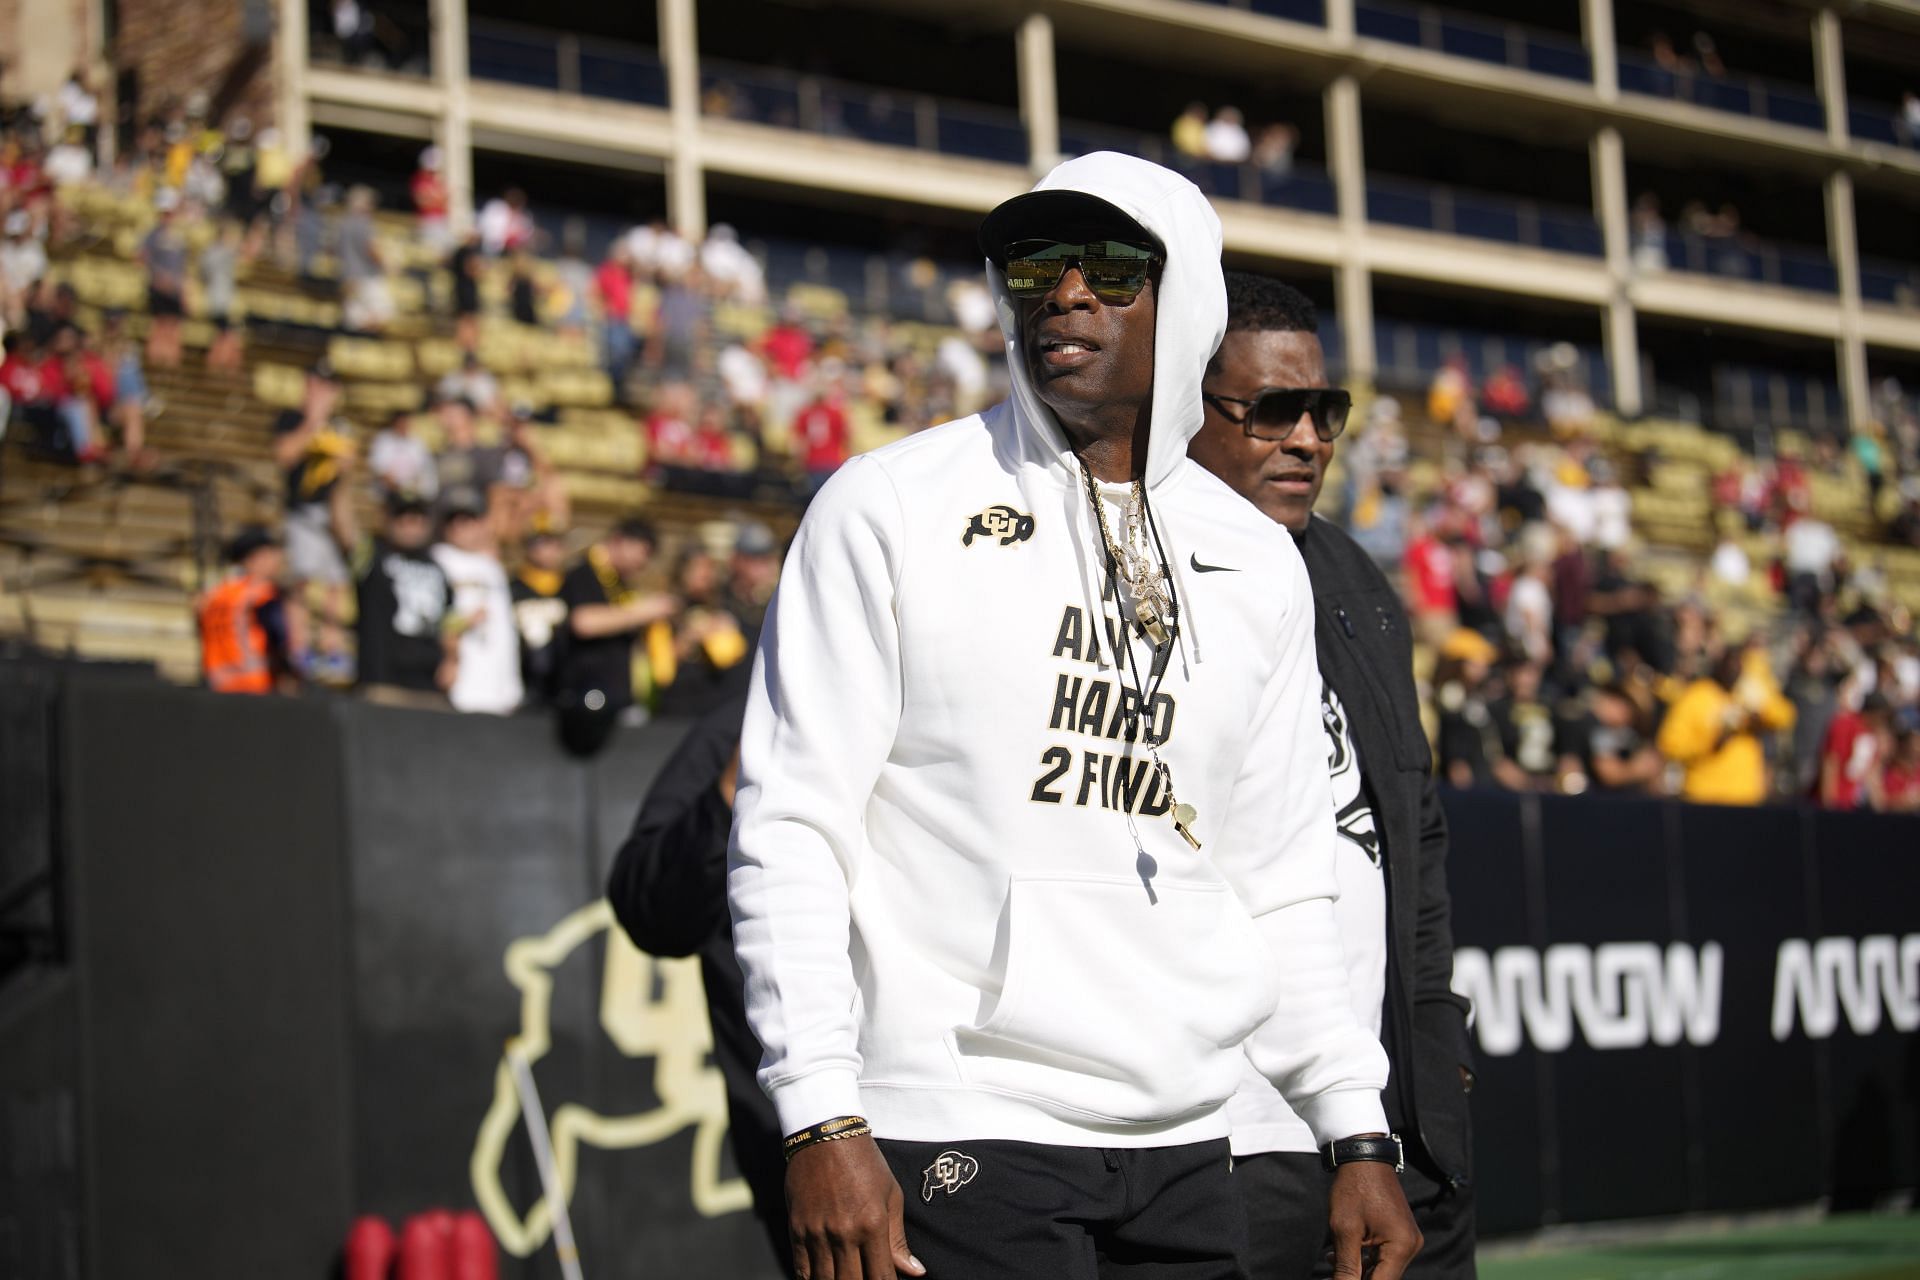 UPDATE: DEION SANDERS AWARDED PRIMARY CUSTODY OF SONS AND DAUGHTER